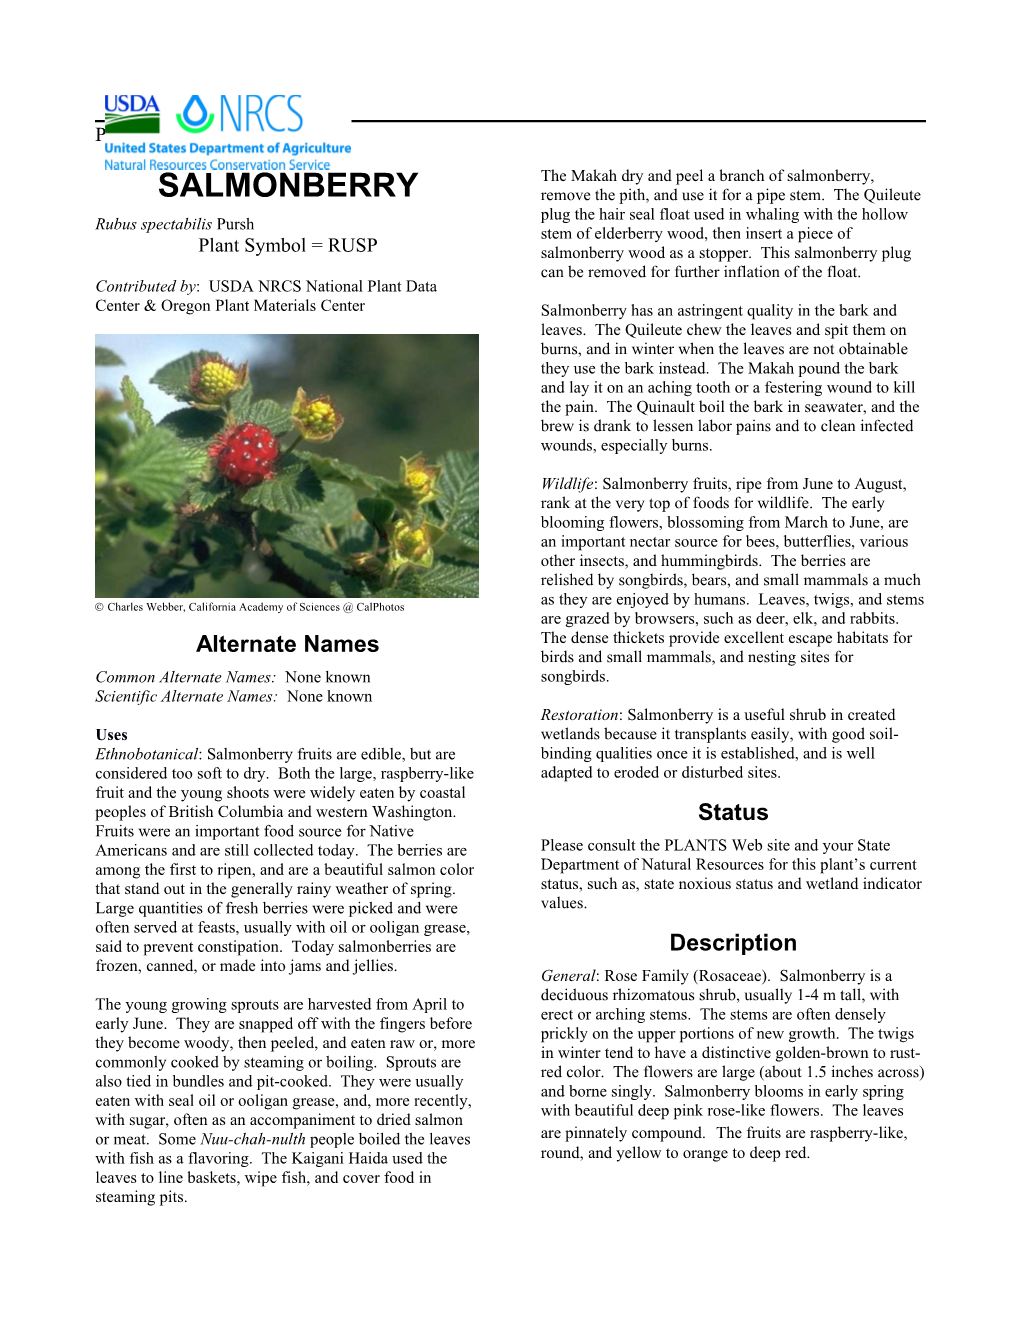 Plant Guide for Salmonberry (Rubus Spectabilis)